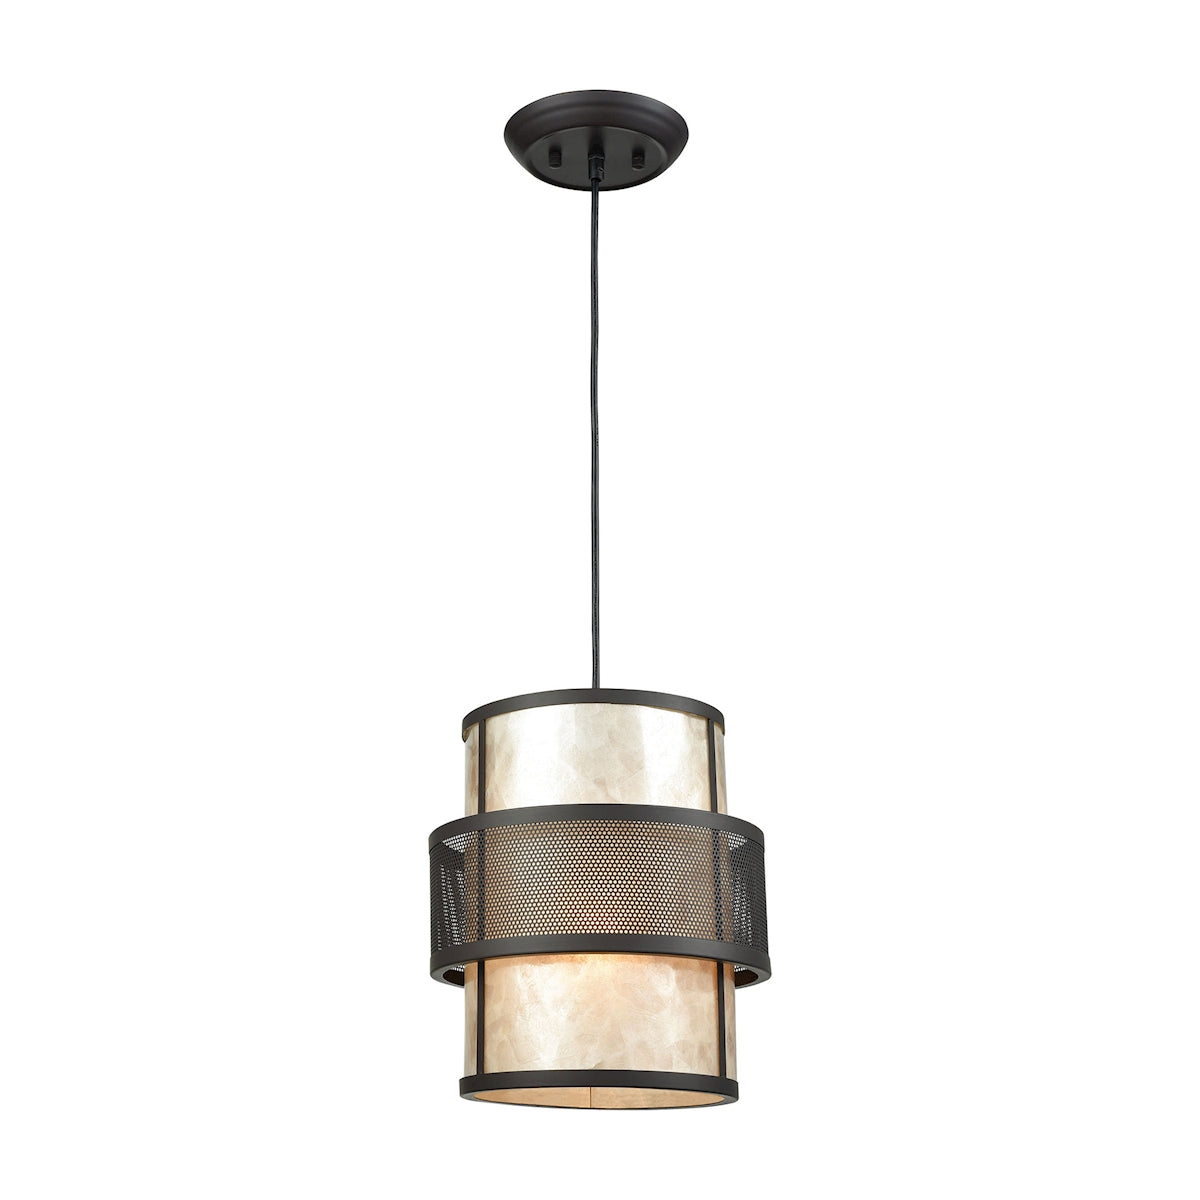 ELK Lighting 72184/1 Beckley 1-Light Mini Pendant in Oil Rubbed Bronze with Metal and Mica Shade